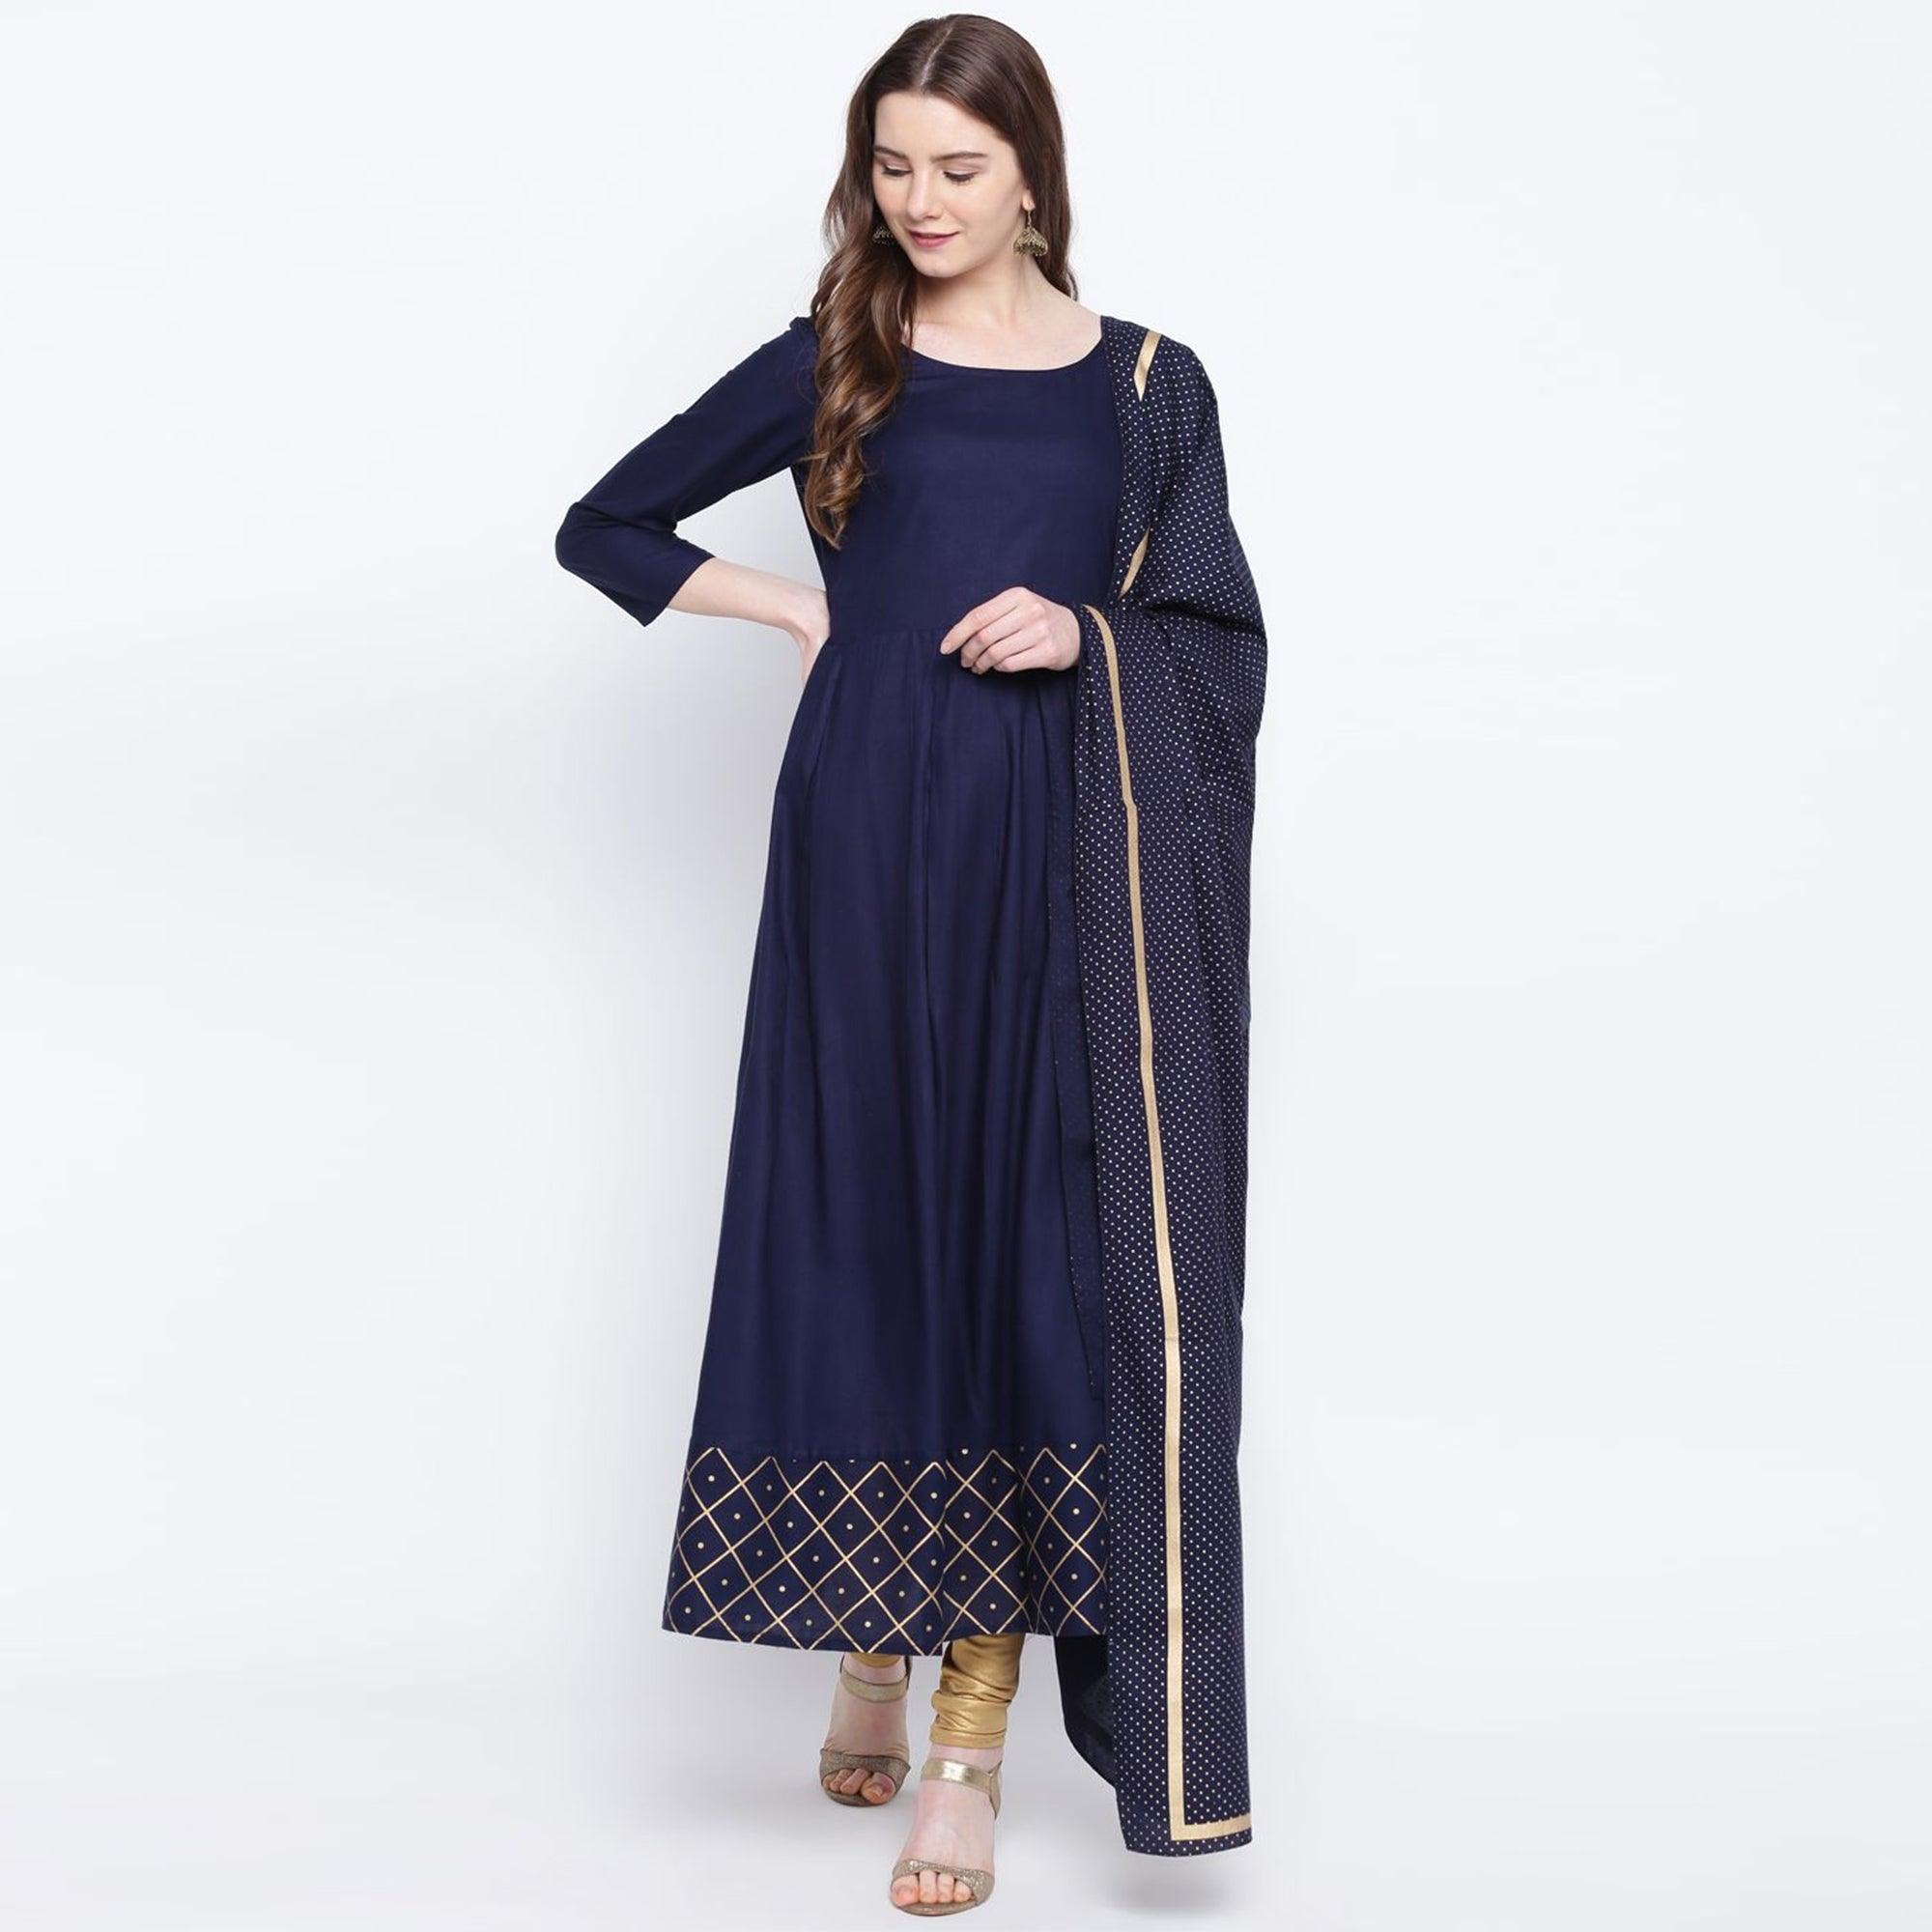 Intricate Navy Blue Colored Party Wear Printed Ankle Length Rayon Kurti With Dupatta - Peachmode